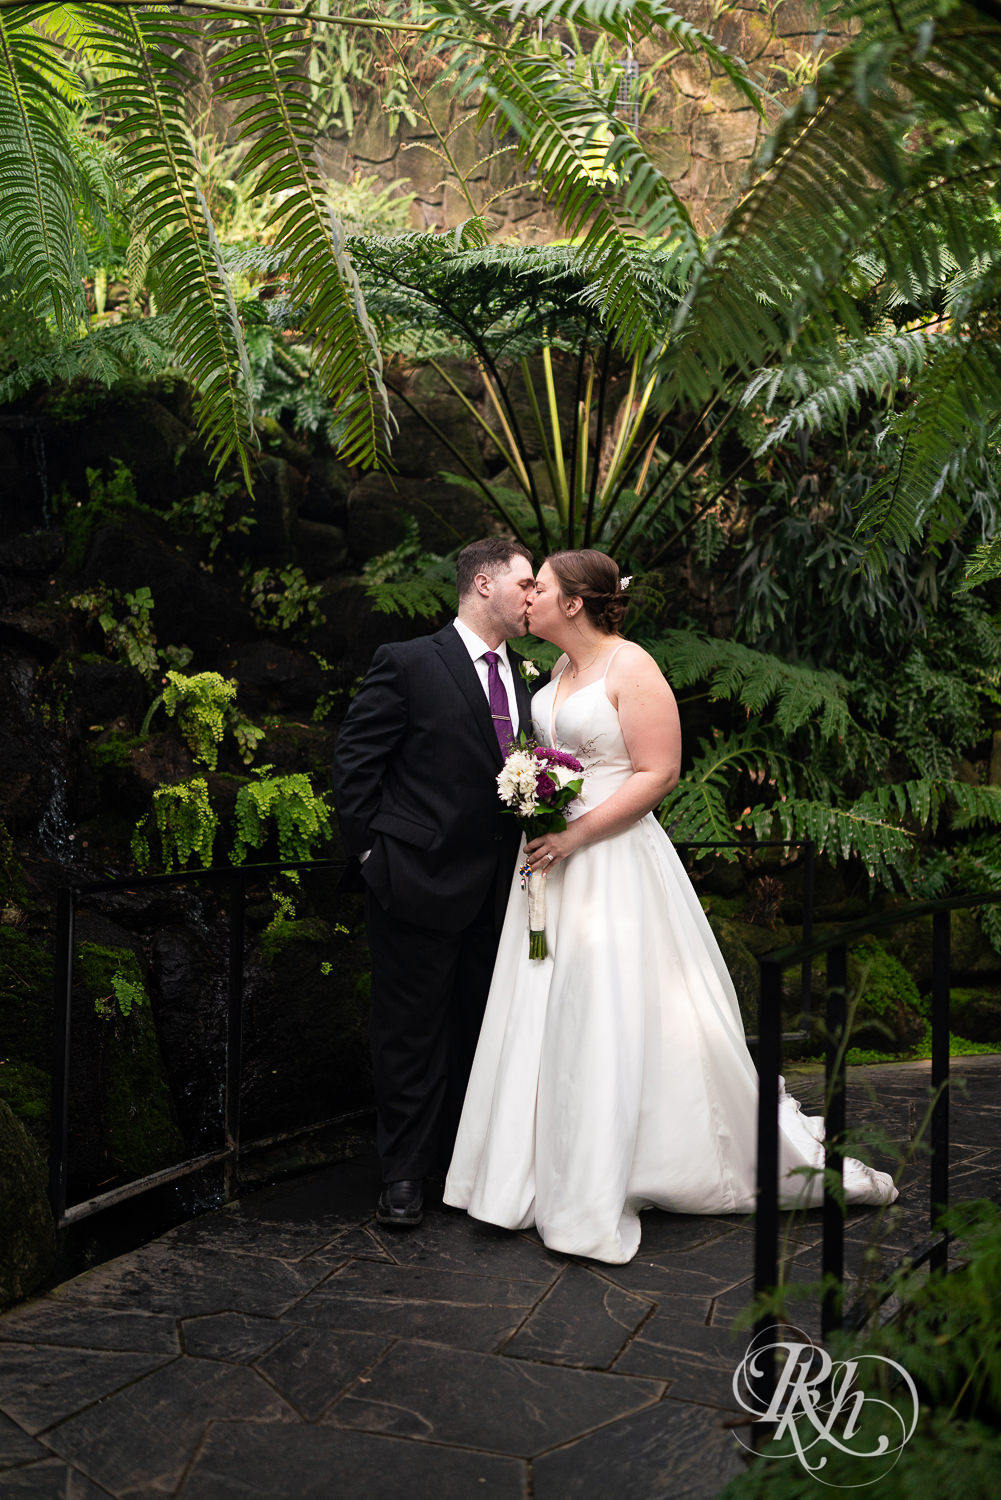 Bride and groom kissing among flowers at wedding at Como Zoo in Saint Paul, Minnesota.